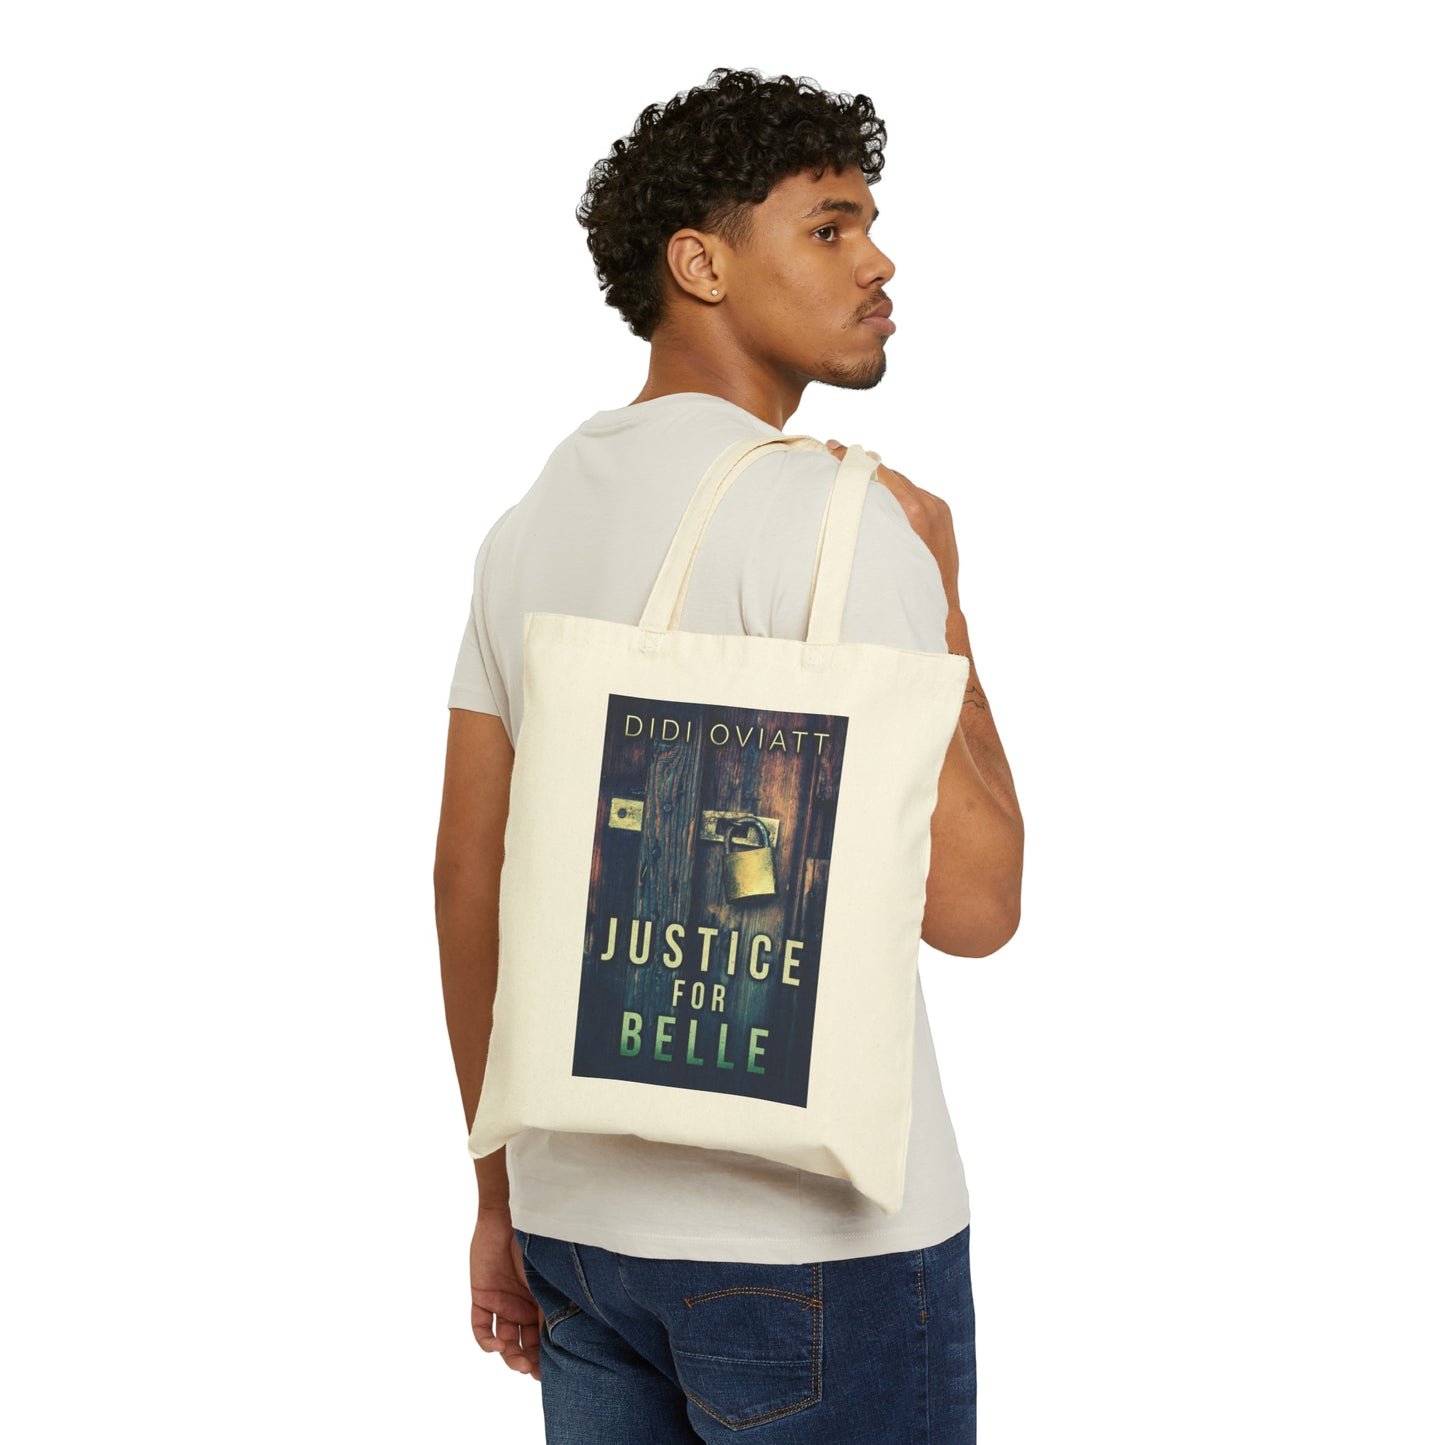 Justice For Belle - Cotton Canvas Tote Bag